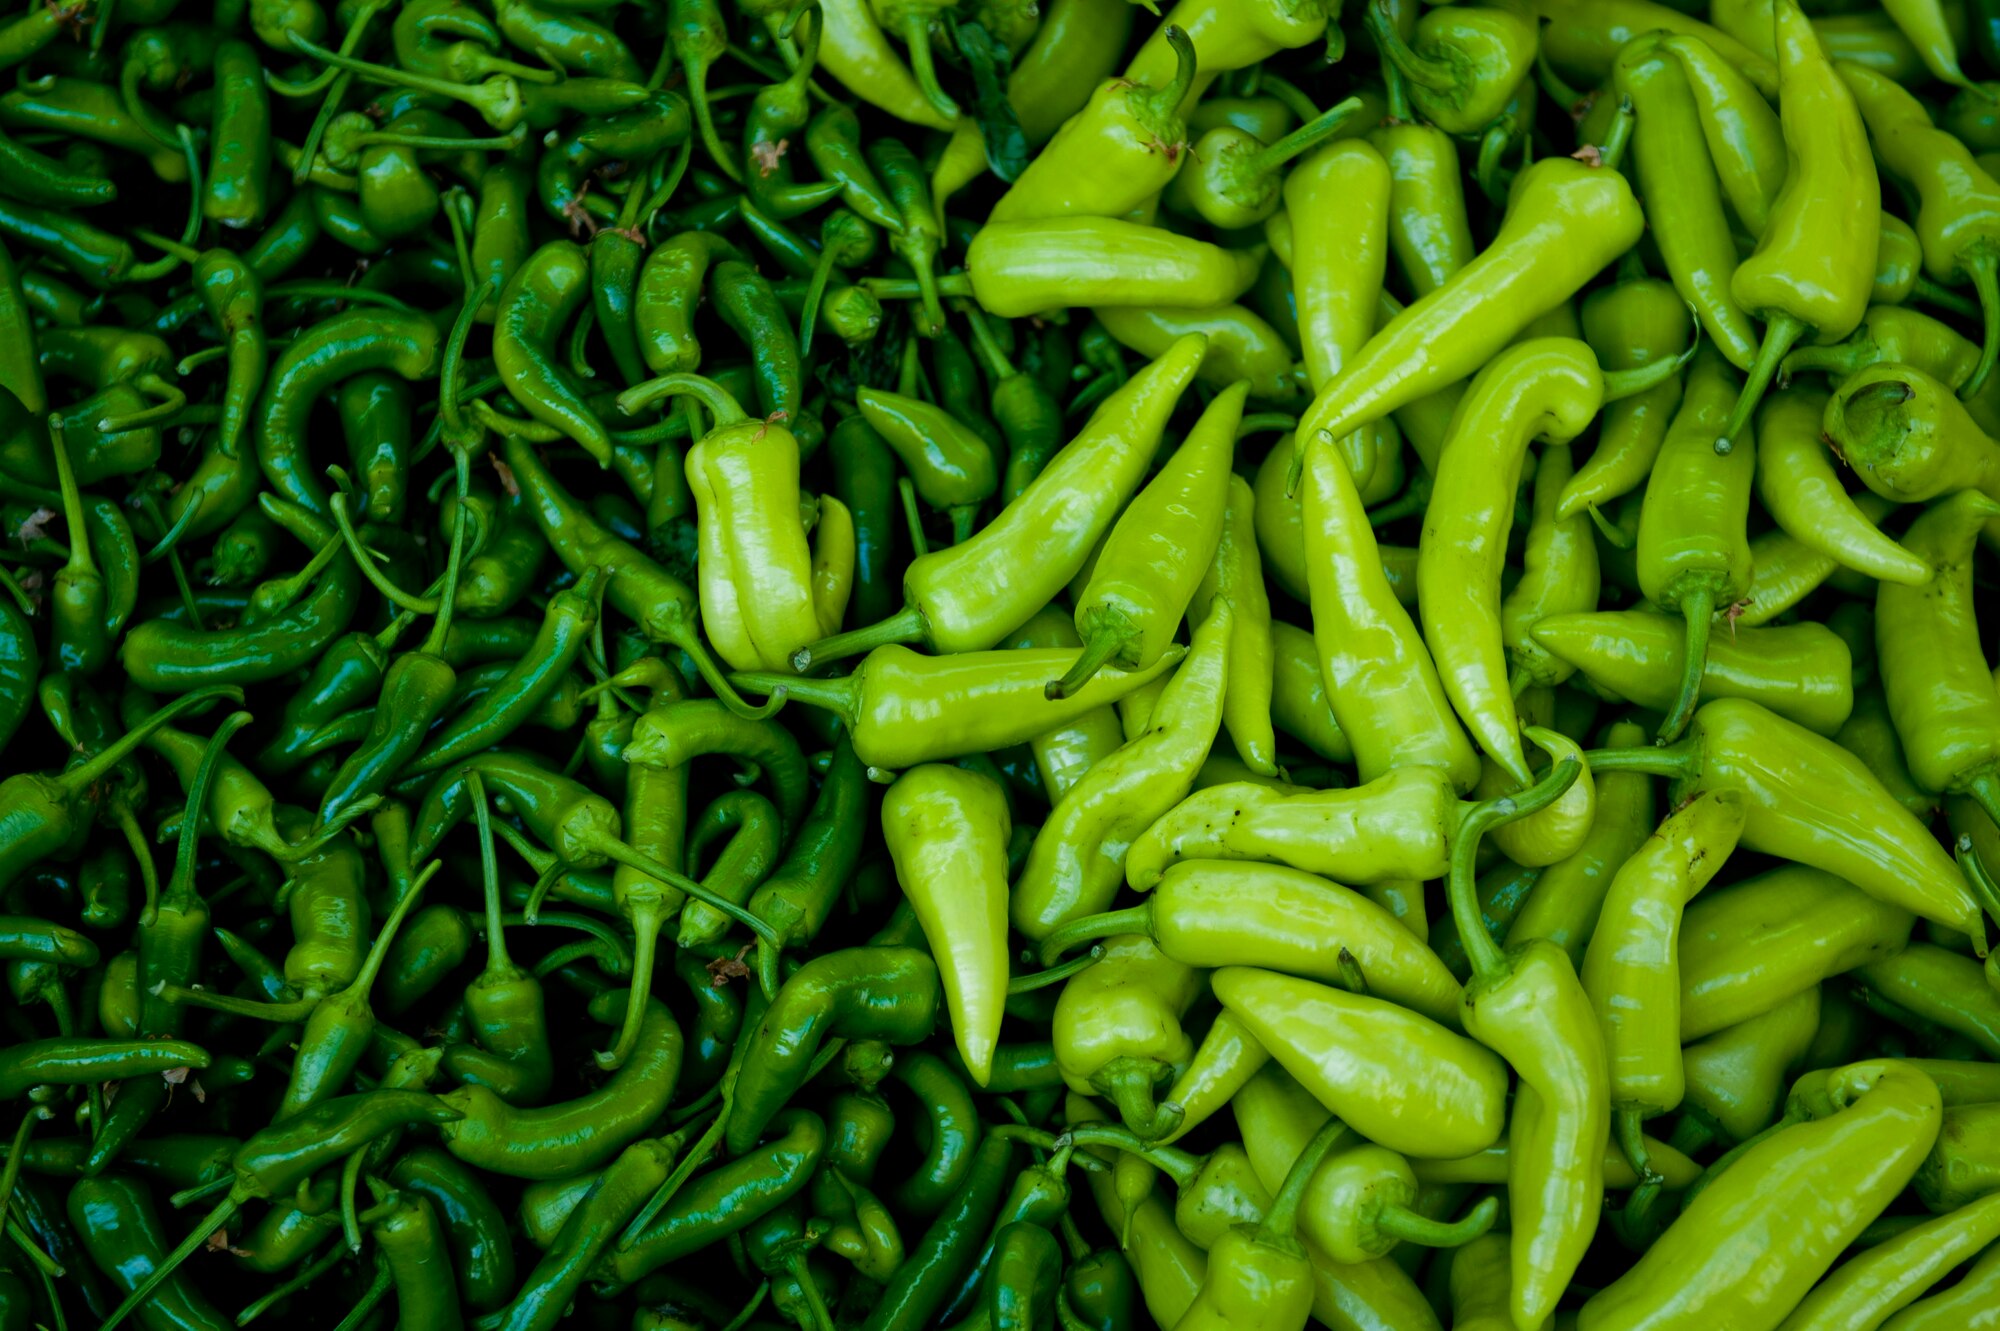 Many vegetables, including peppers, are commonly found at farmers markets in Adana, Turkey. Markets are open on different days of the week in various districts of Adana. The climate and fertile soil of the area allow the markets to offer a wide variety of fresh goods at low prices. (U.S. Air Force photo by Tech. Sgt. Michael B. Keller/Released)